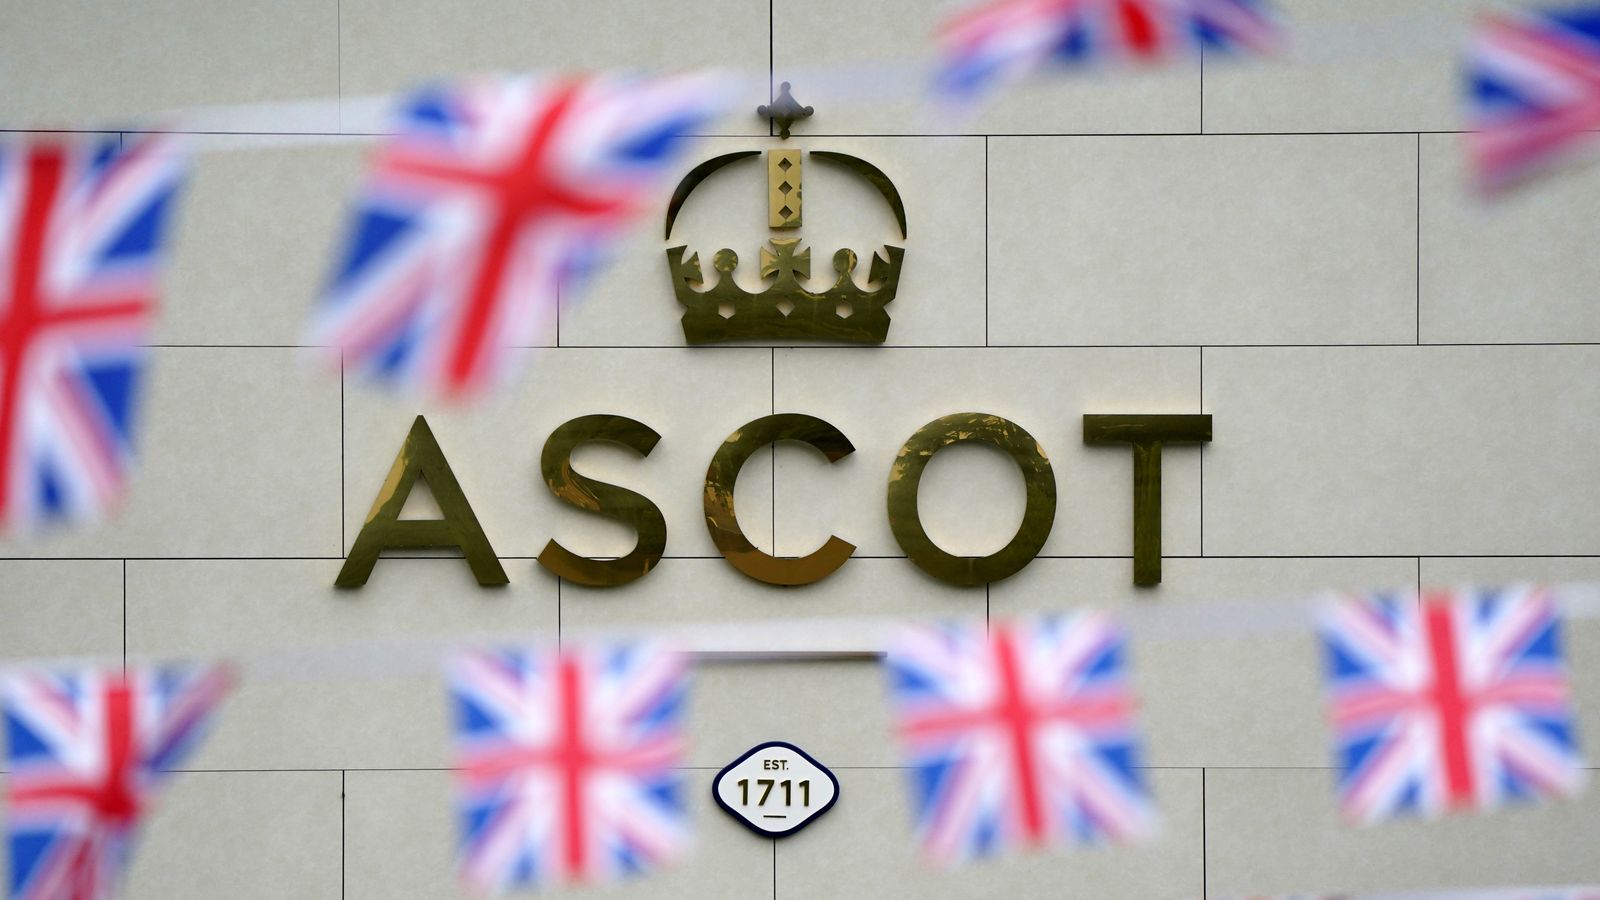 Royal Ascot day one tips: 10/1 Man Of Promise to deliver in King’s Stand Stakes – Jones Knows